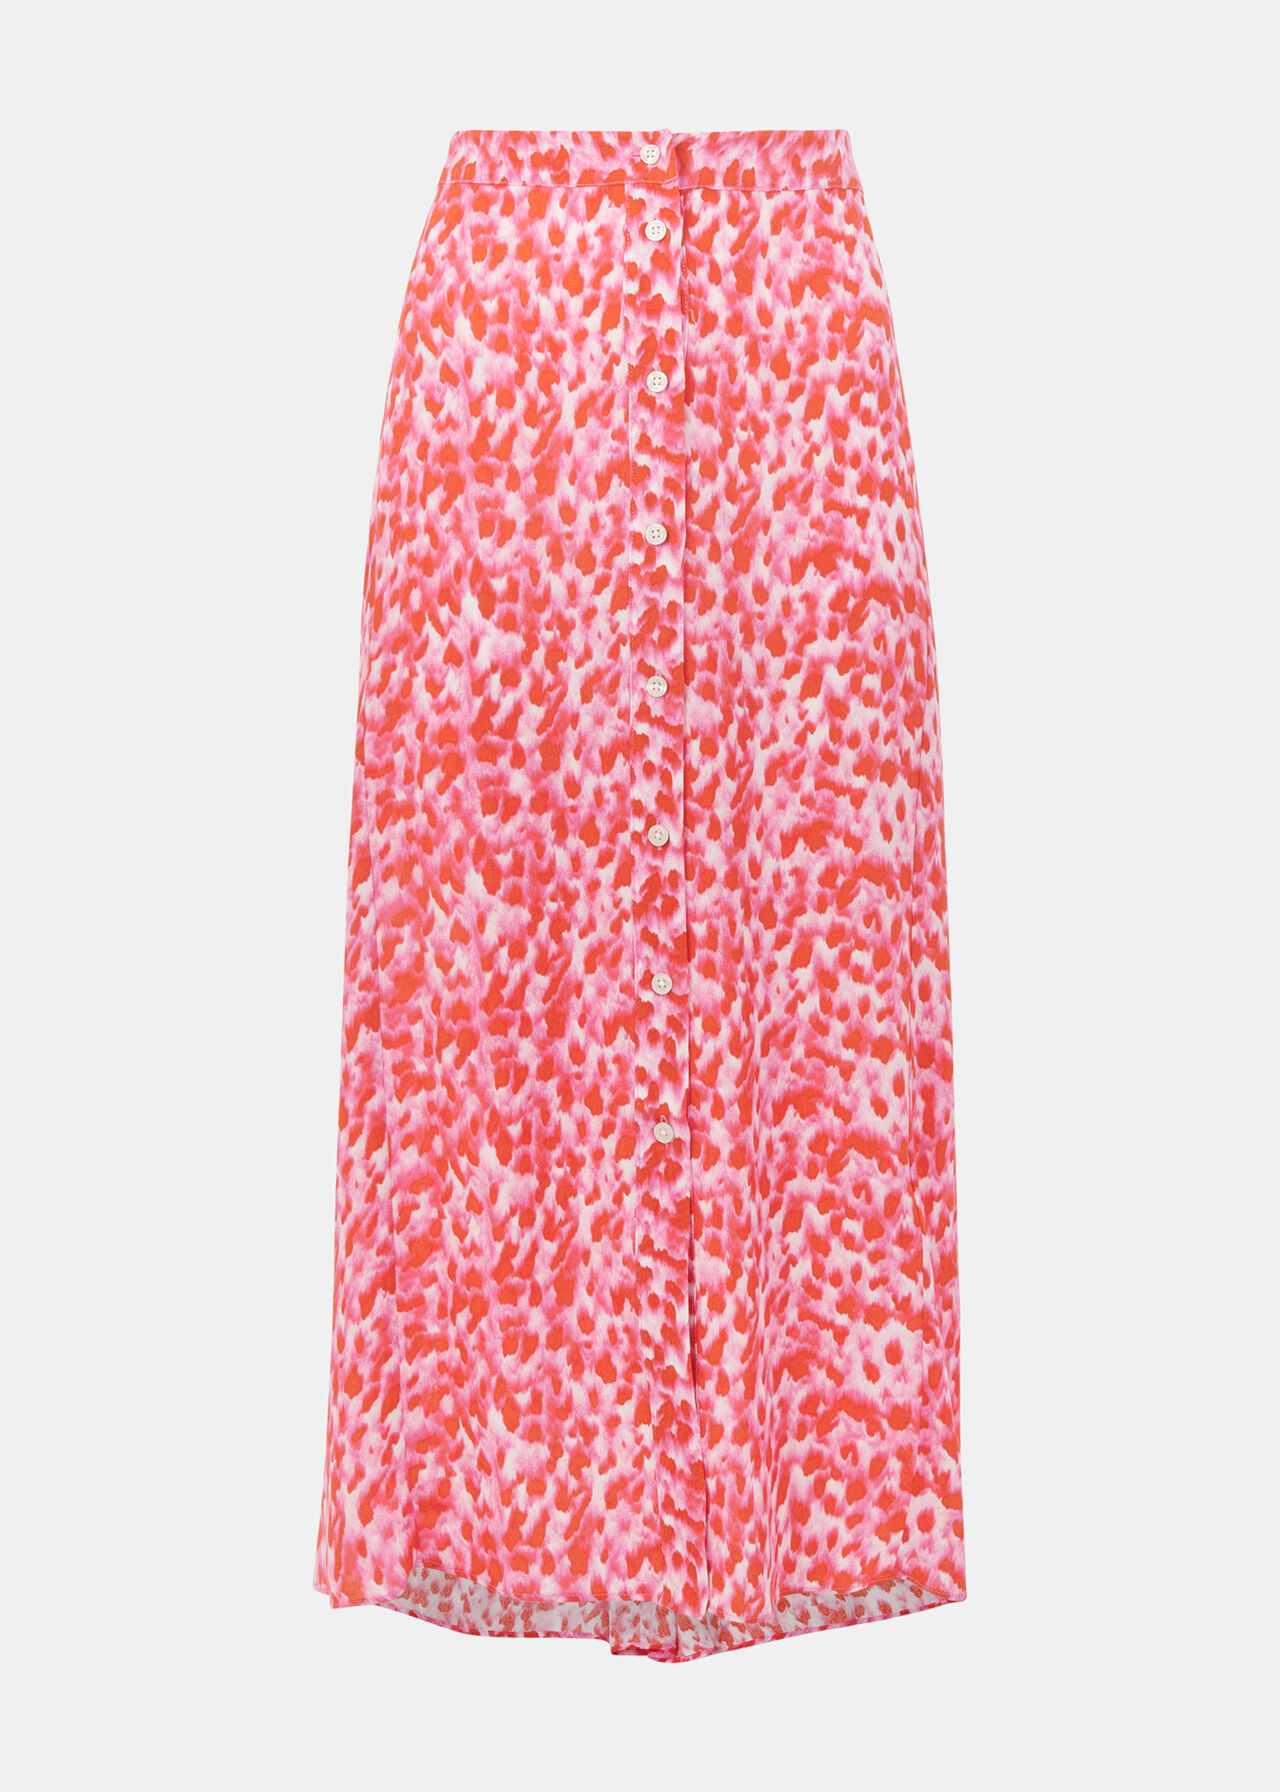 Pink/Multi Blurred Strokes Button Skirt | WHISTLES